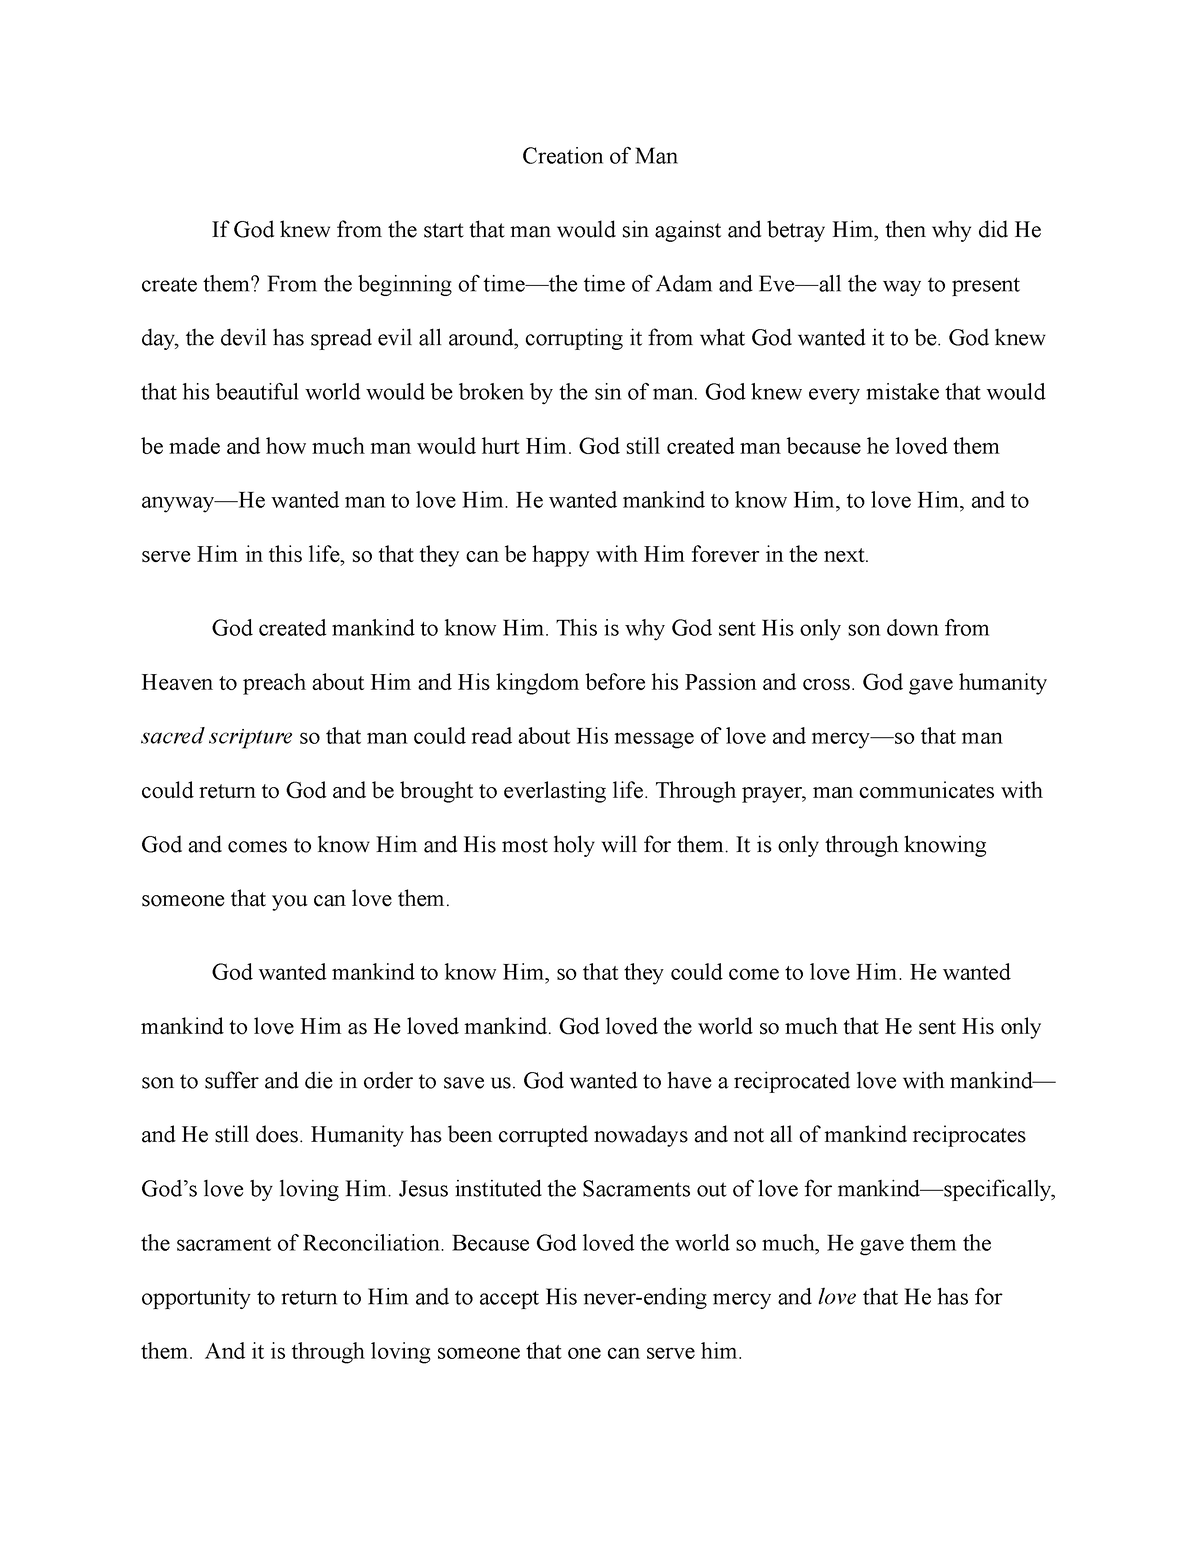 essay about god's creation of man